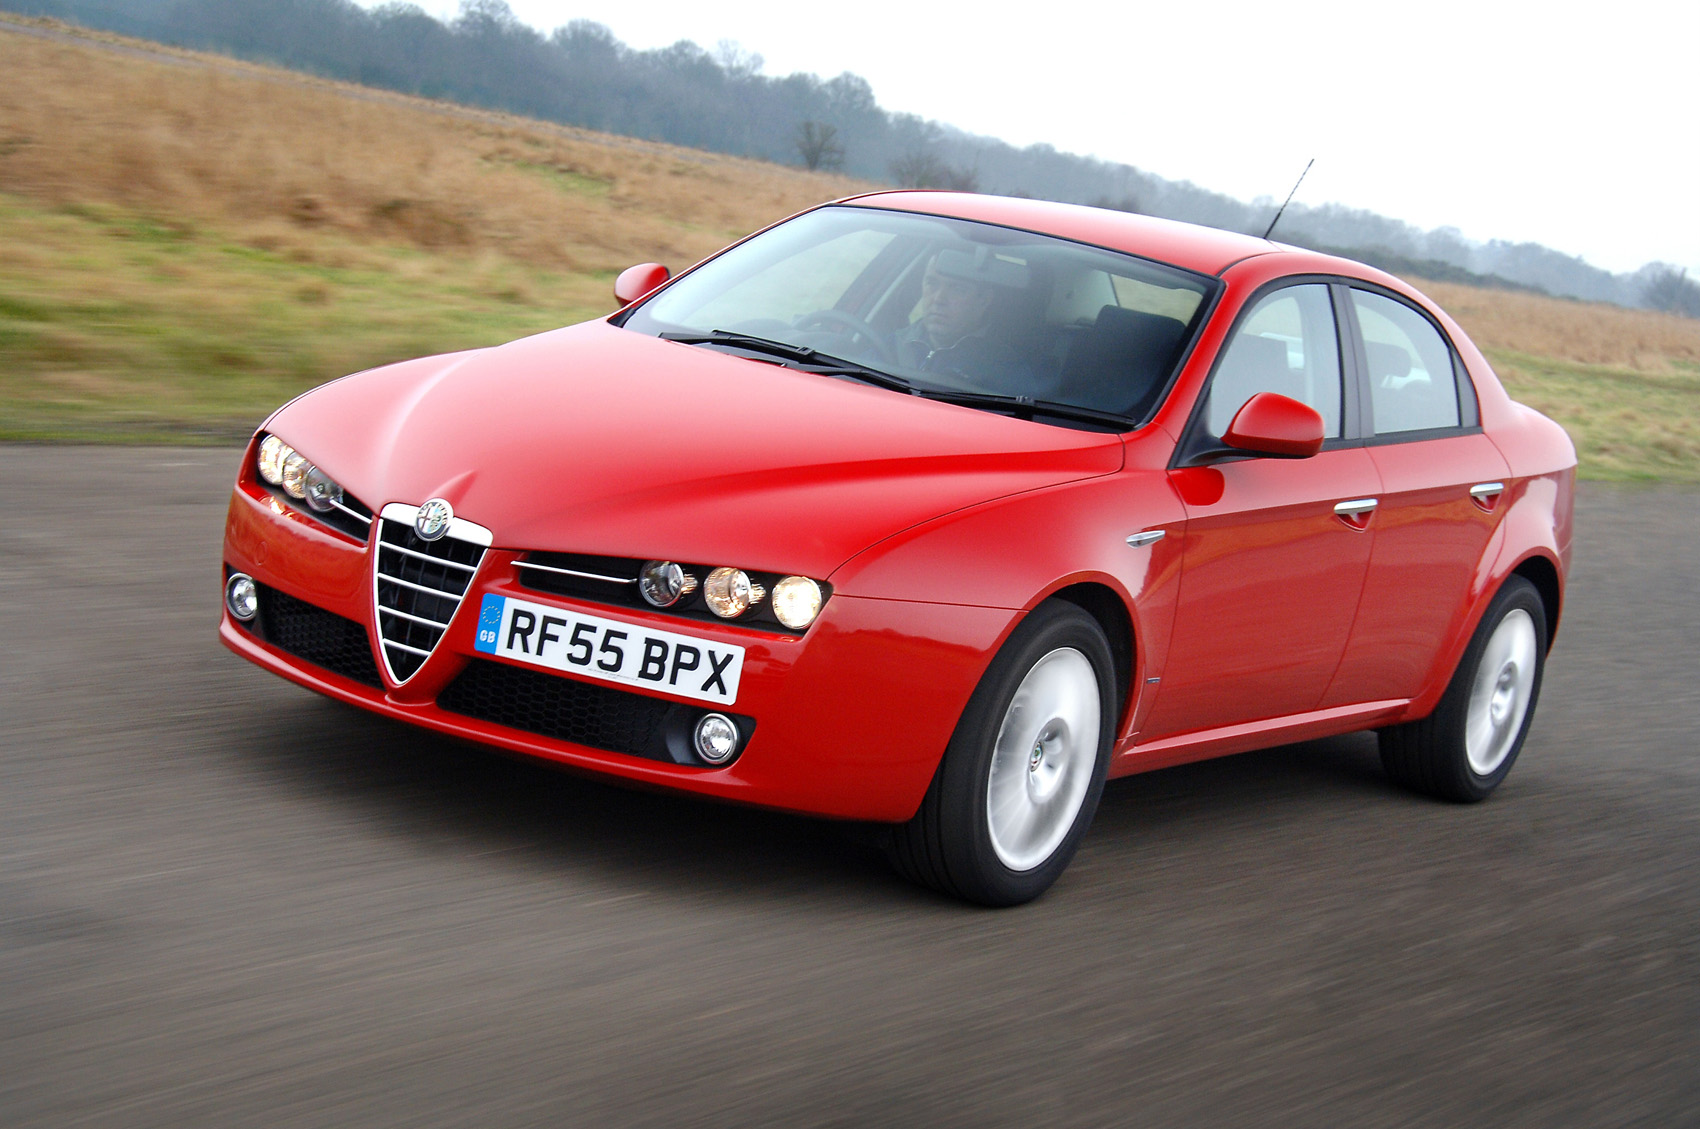 Alfa Romeo 159 – The Time is Now